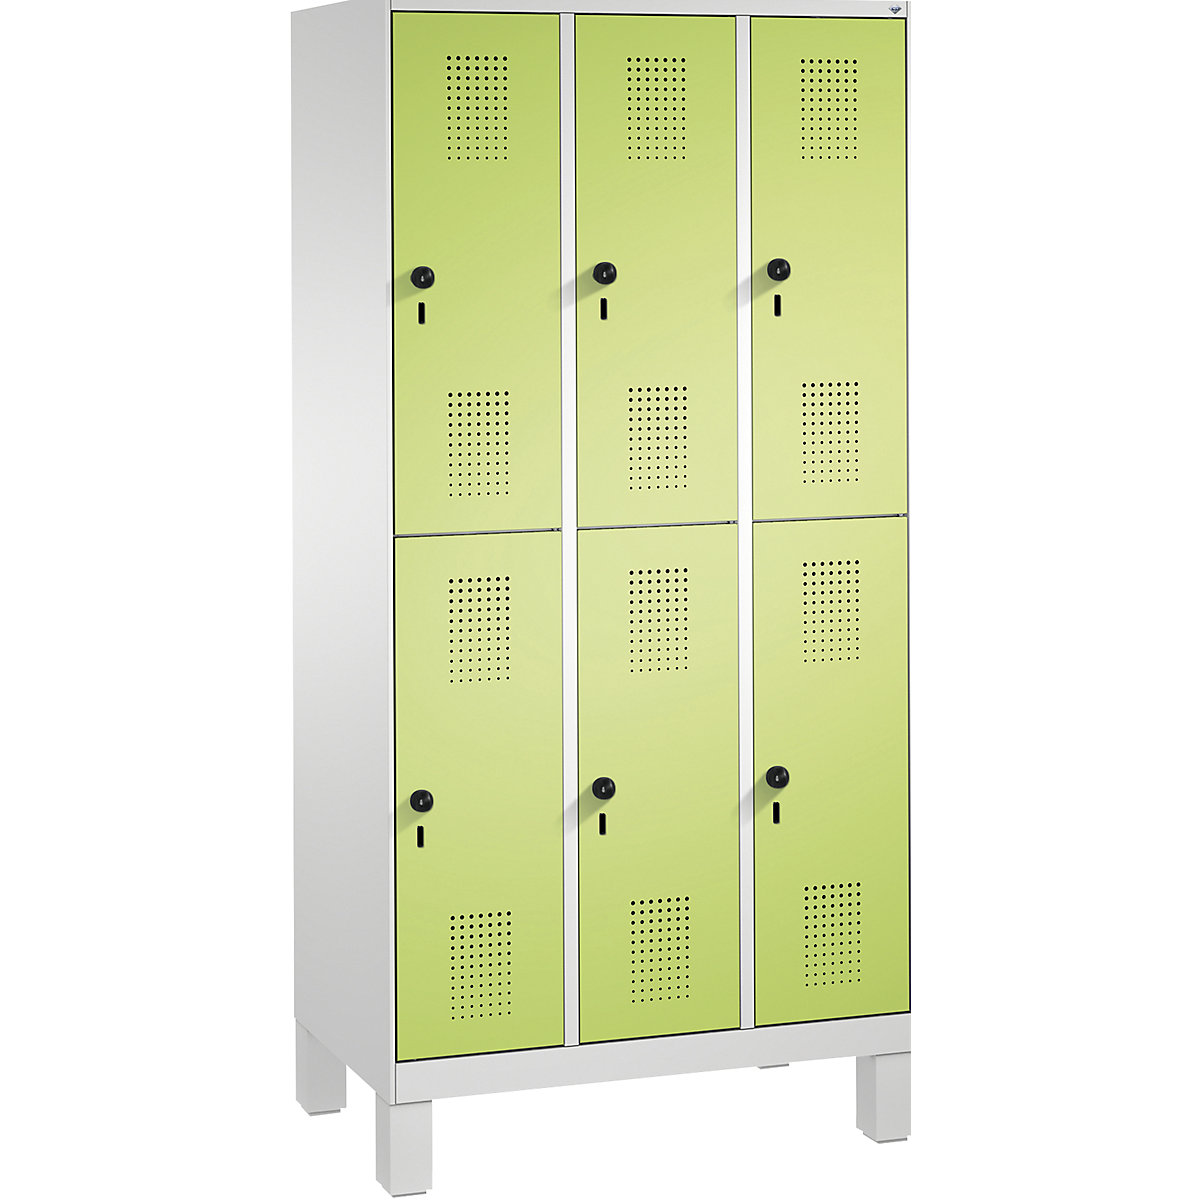 EVOLO cloakroom locker, double tier, with feet – C+P, 3 compartments, 2 shelf compartments each, compartment width 300 mm, light grey / viridian green-12